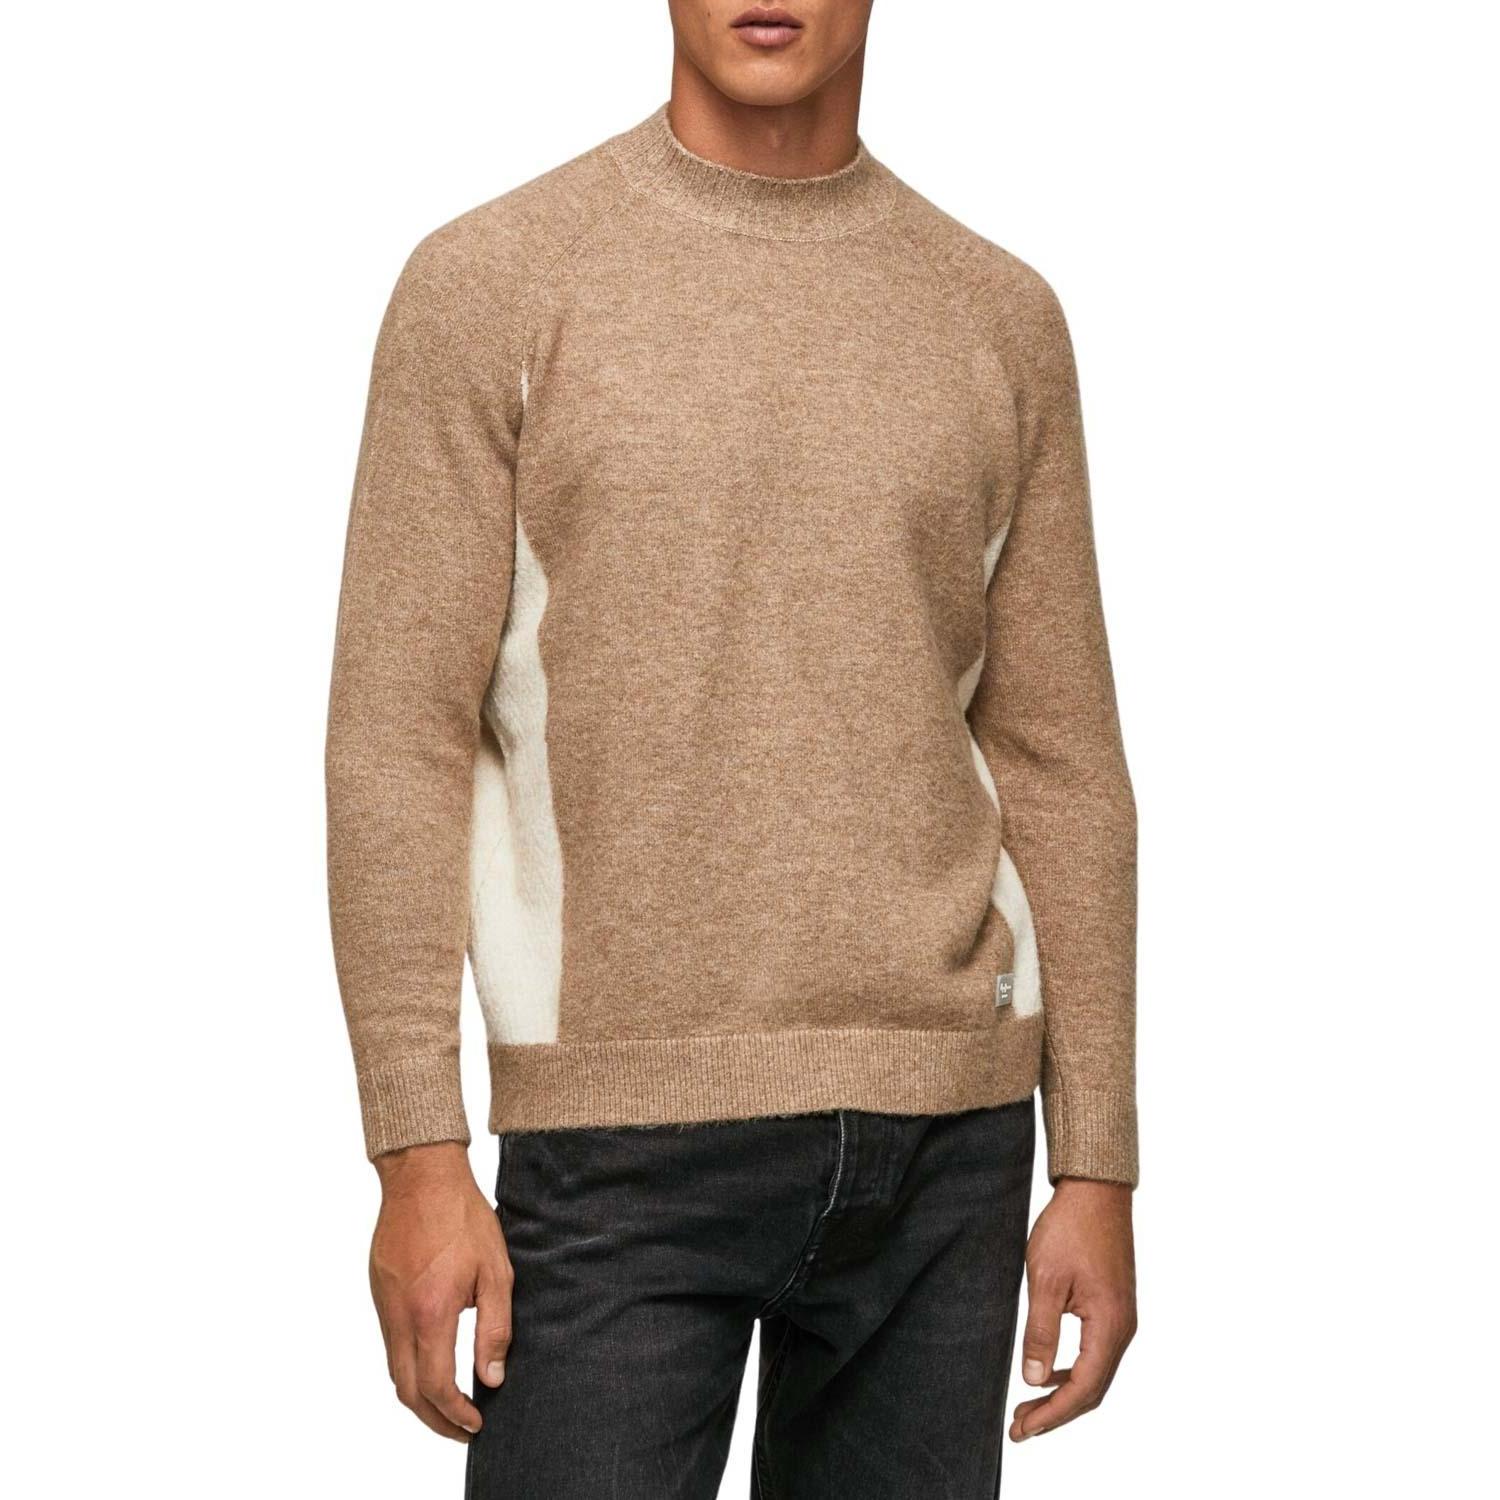 Pepe Jeans - Jersey Pepe Jeans Monroi Beige para Hombre